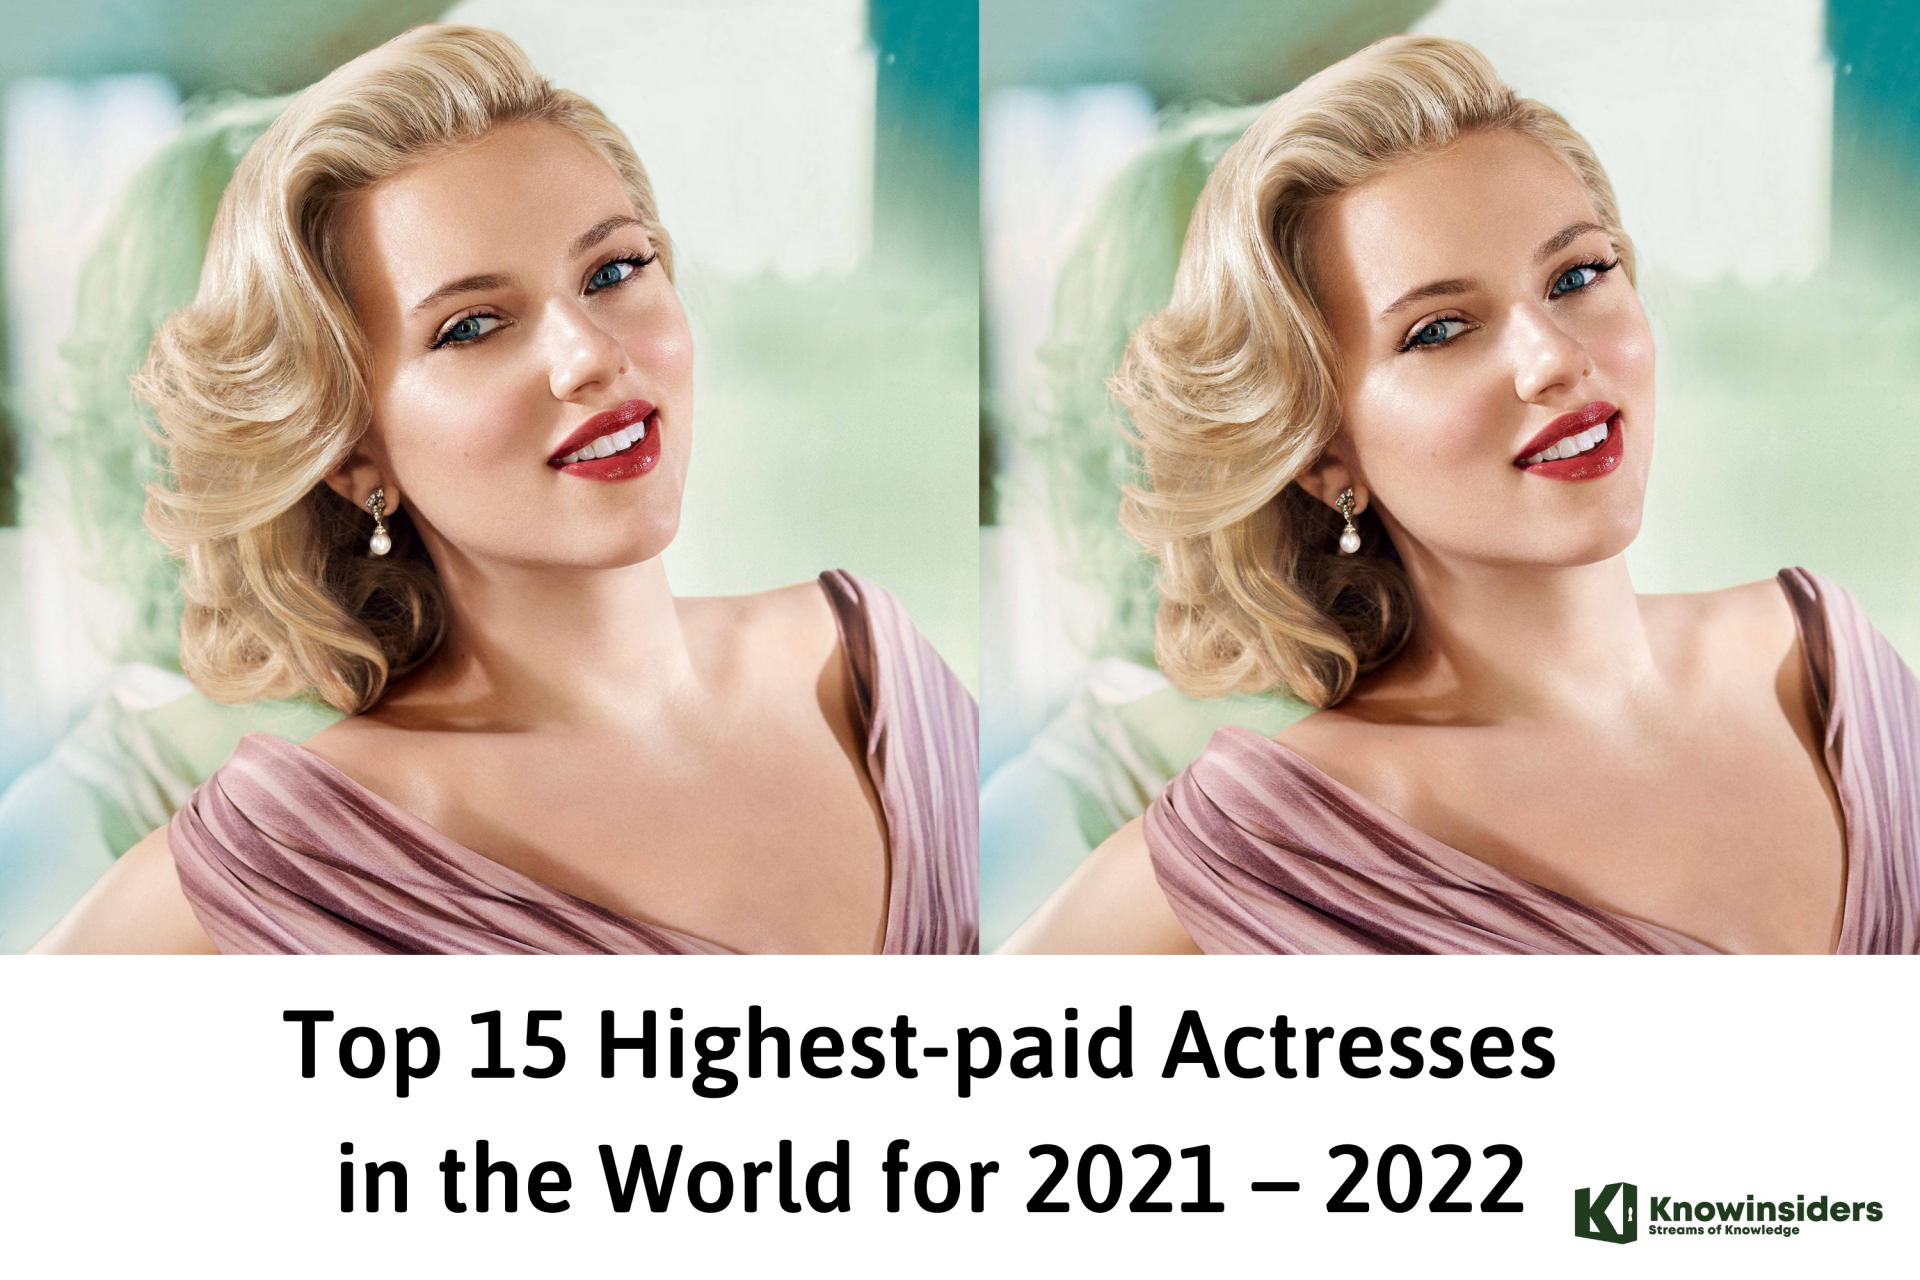 Top 15 Highest-Paid Actresses in the World for 2021/2022